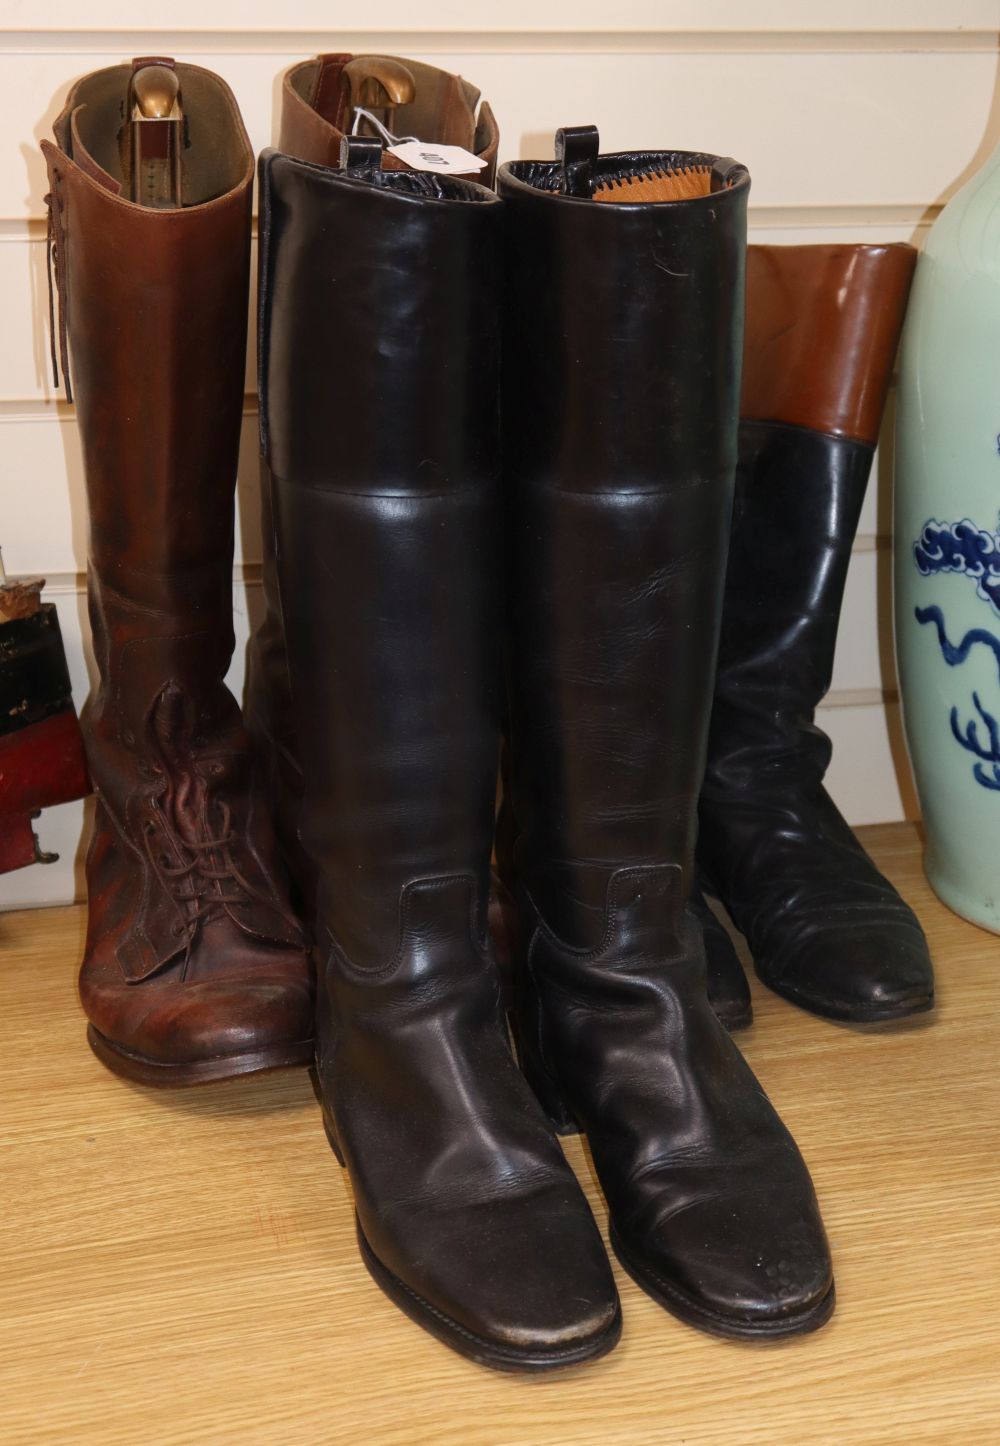 Three pairs of gentlemans riding boots